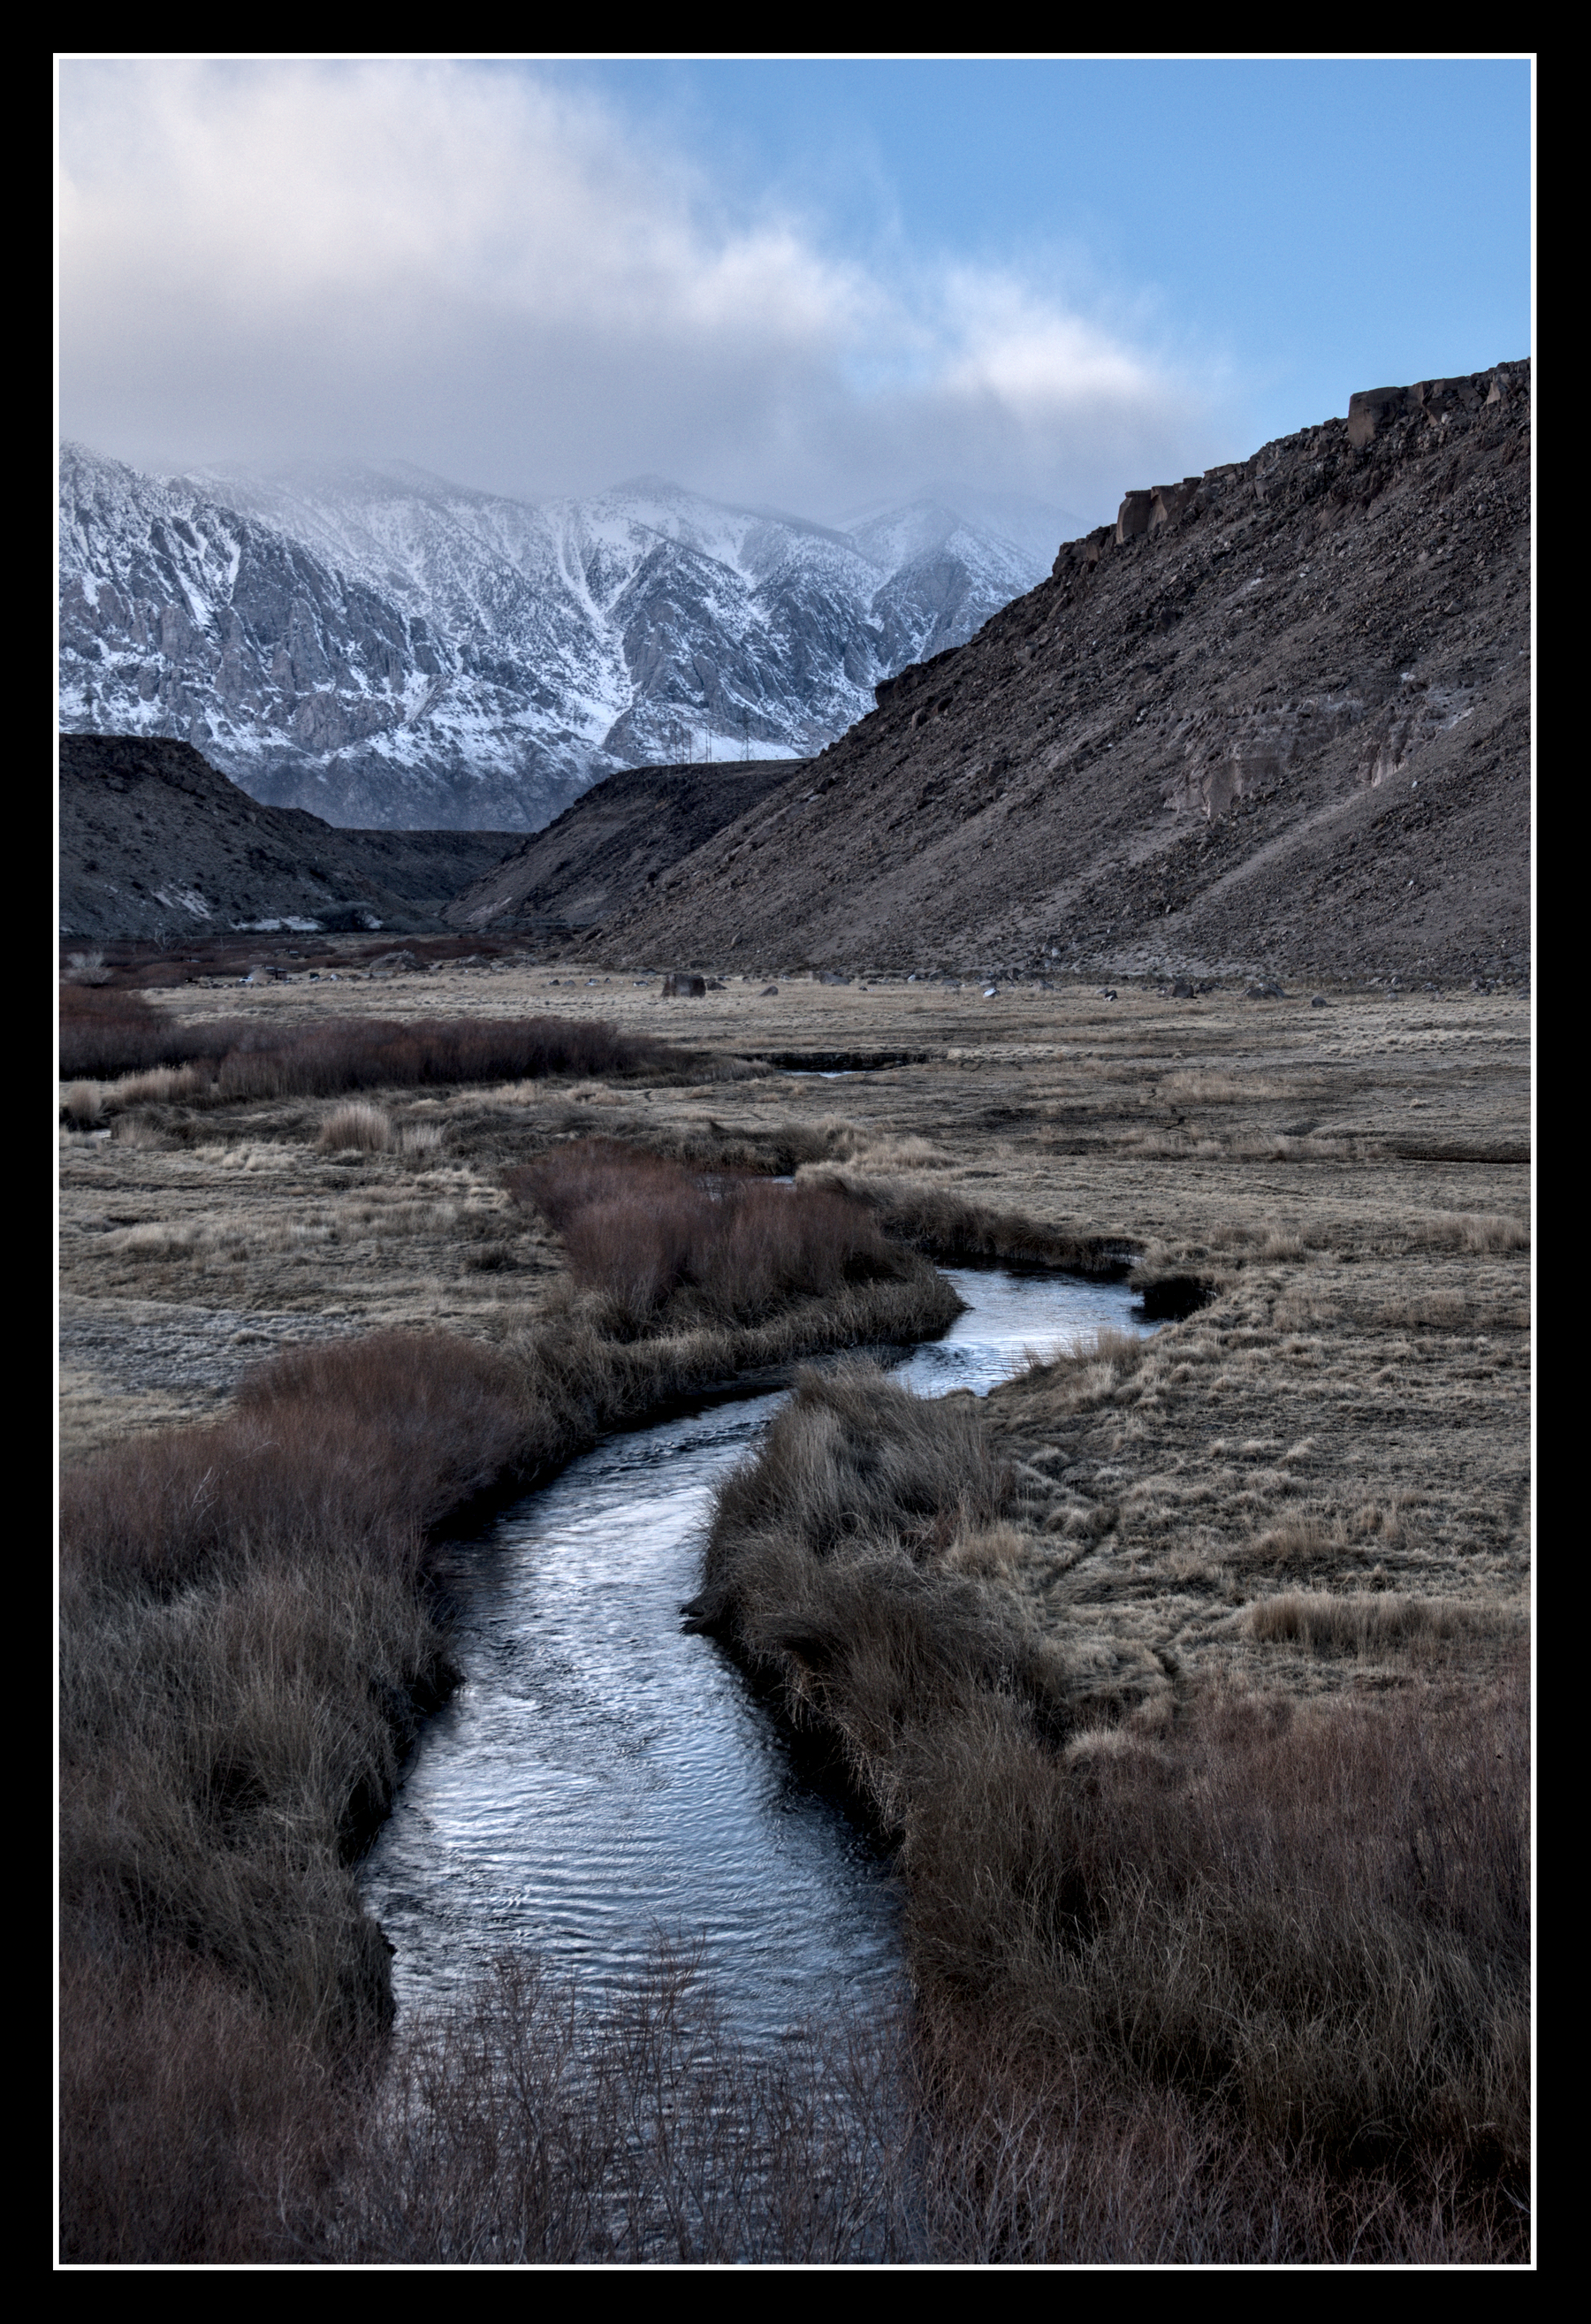 A river cuts through a grassy valley.  Upstream are pink, rocky bluffs.  Beyond them, snow-capped granite mountains.